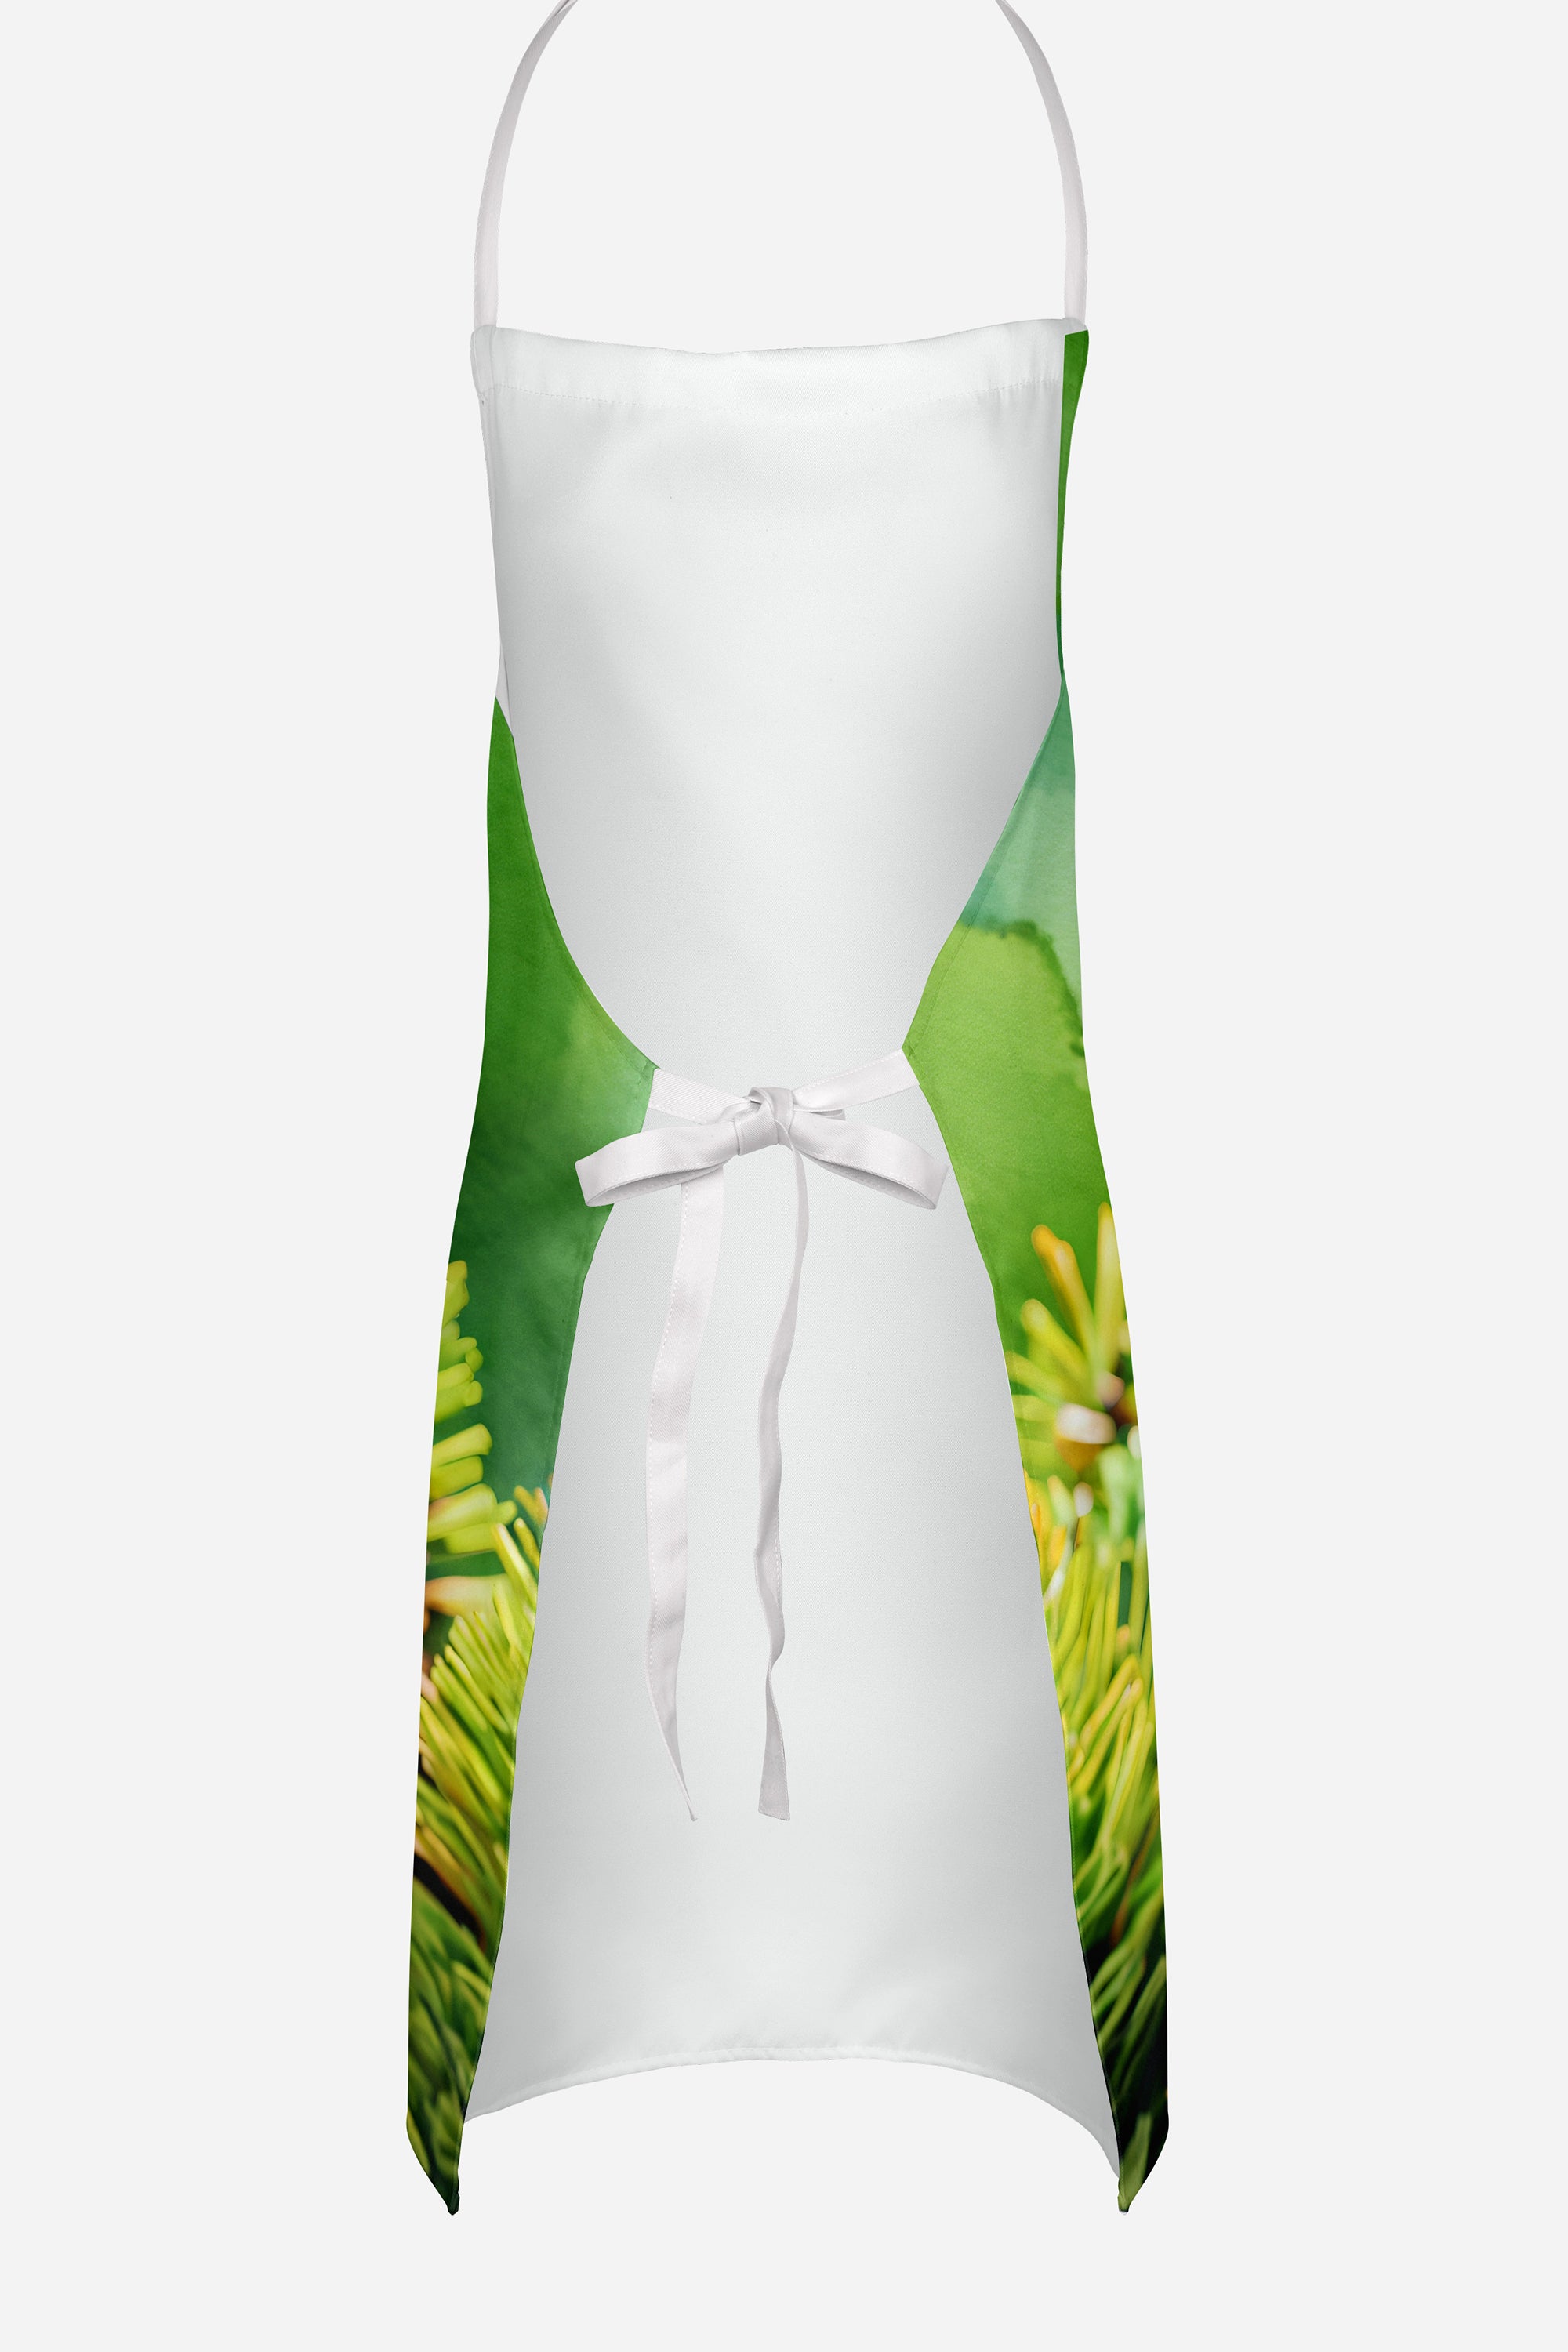 Maine White Pine Cone and Tassels in Watercolor Apron